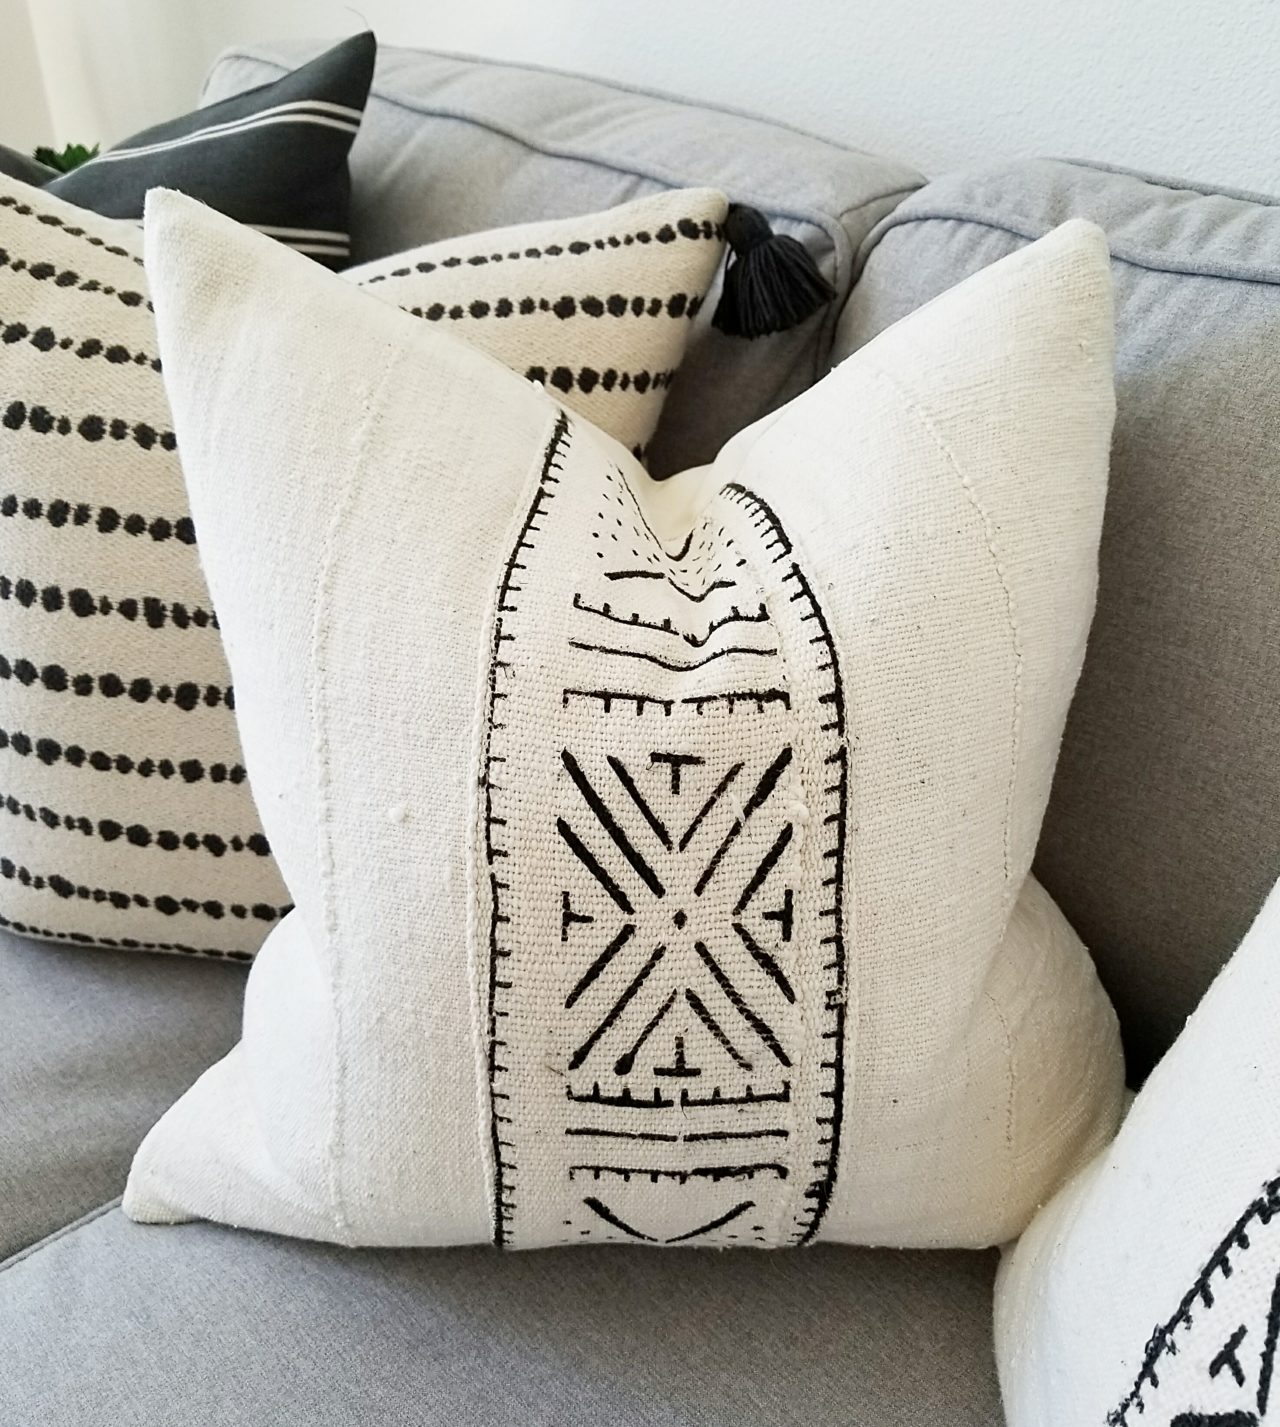 How to Style Your Pillows and Throws Like a Professional